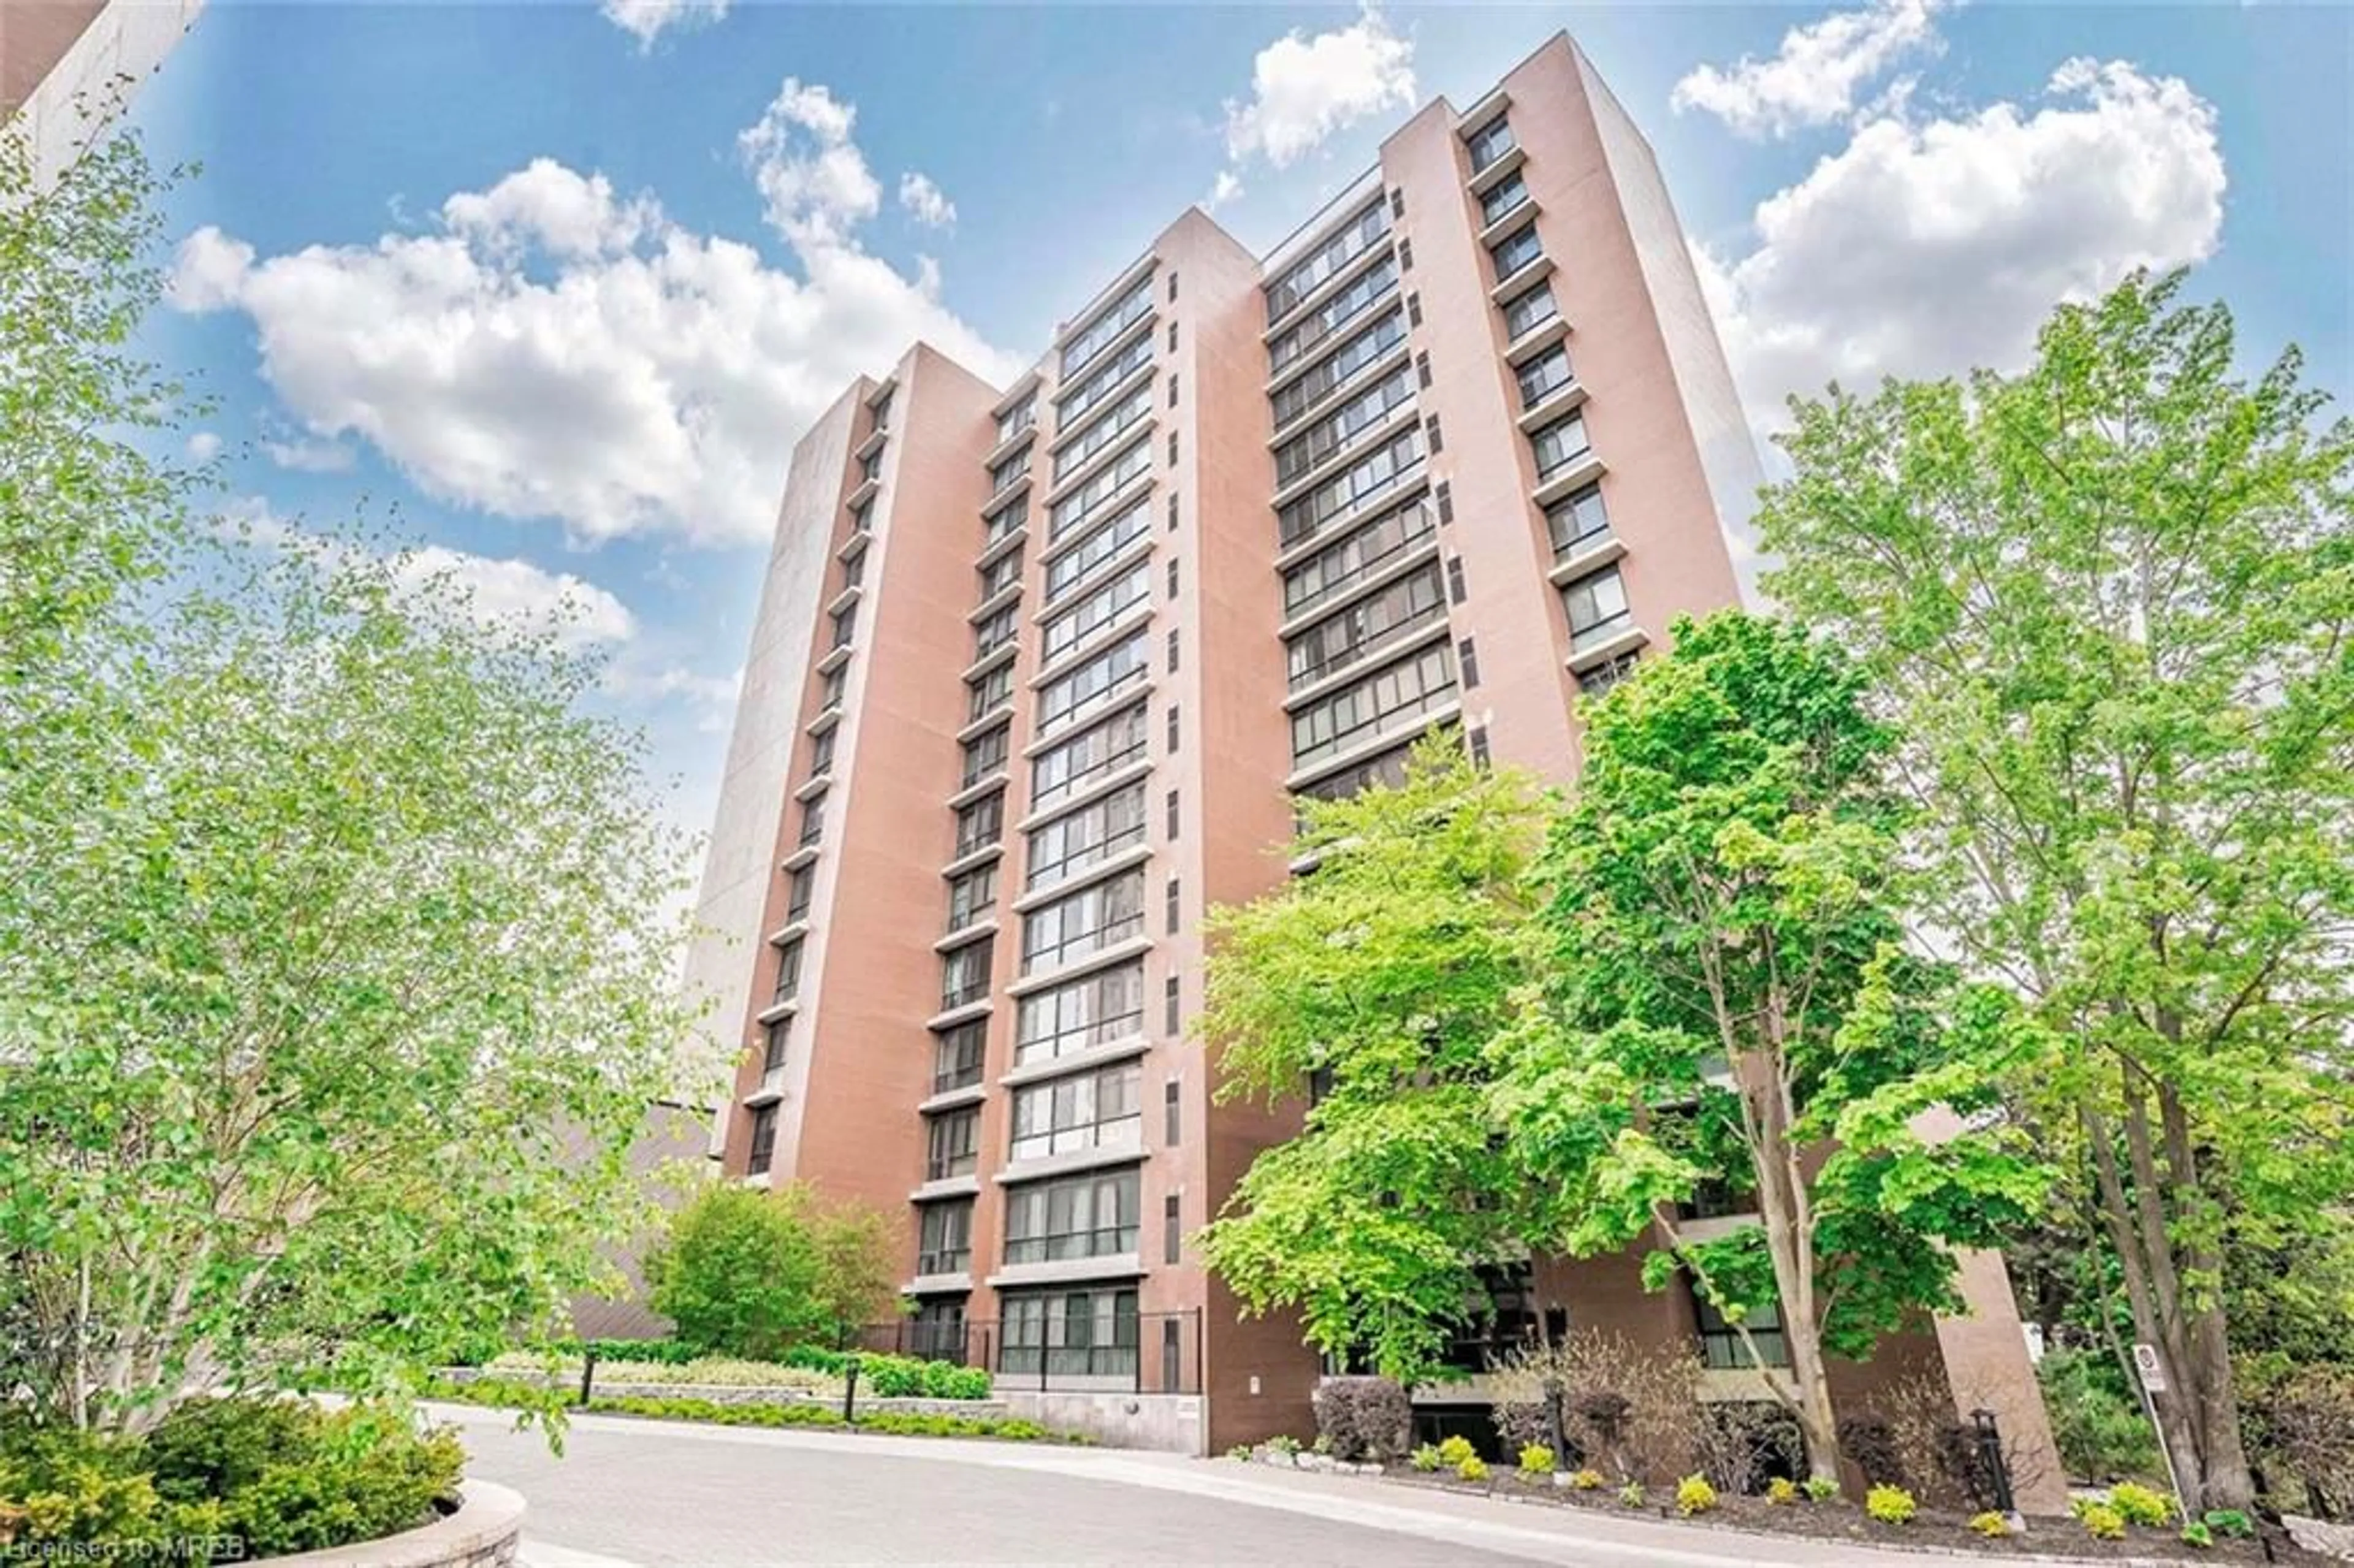 A pic from exterior of the house or condo for 1400 Dixie Rd #216, Mississauga Ontario L5E 3E1